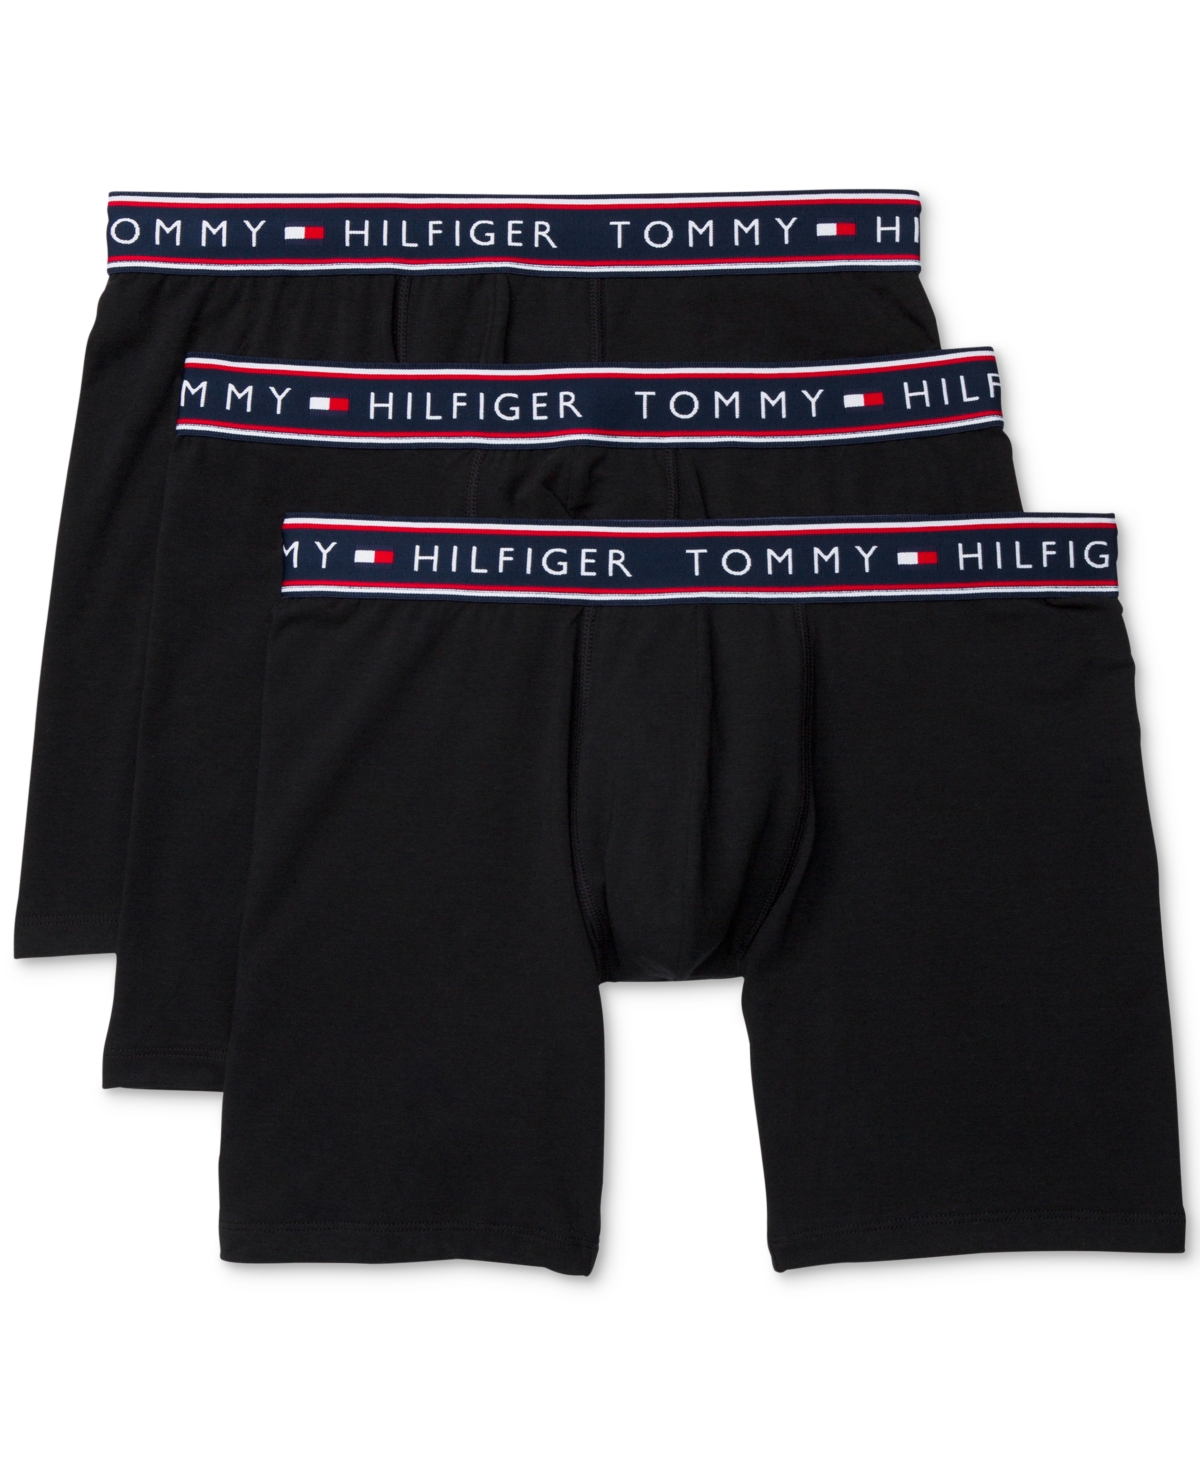 UPC 088541539265 product image for Tommy Hilfiger Men's Cotton Stretch Boxer Brief, 3 Pack | upcitemdb.com